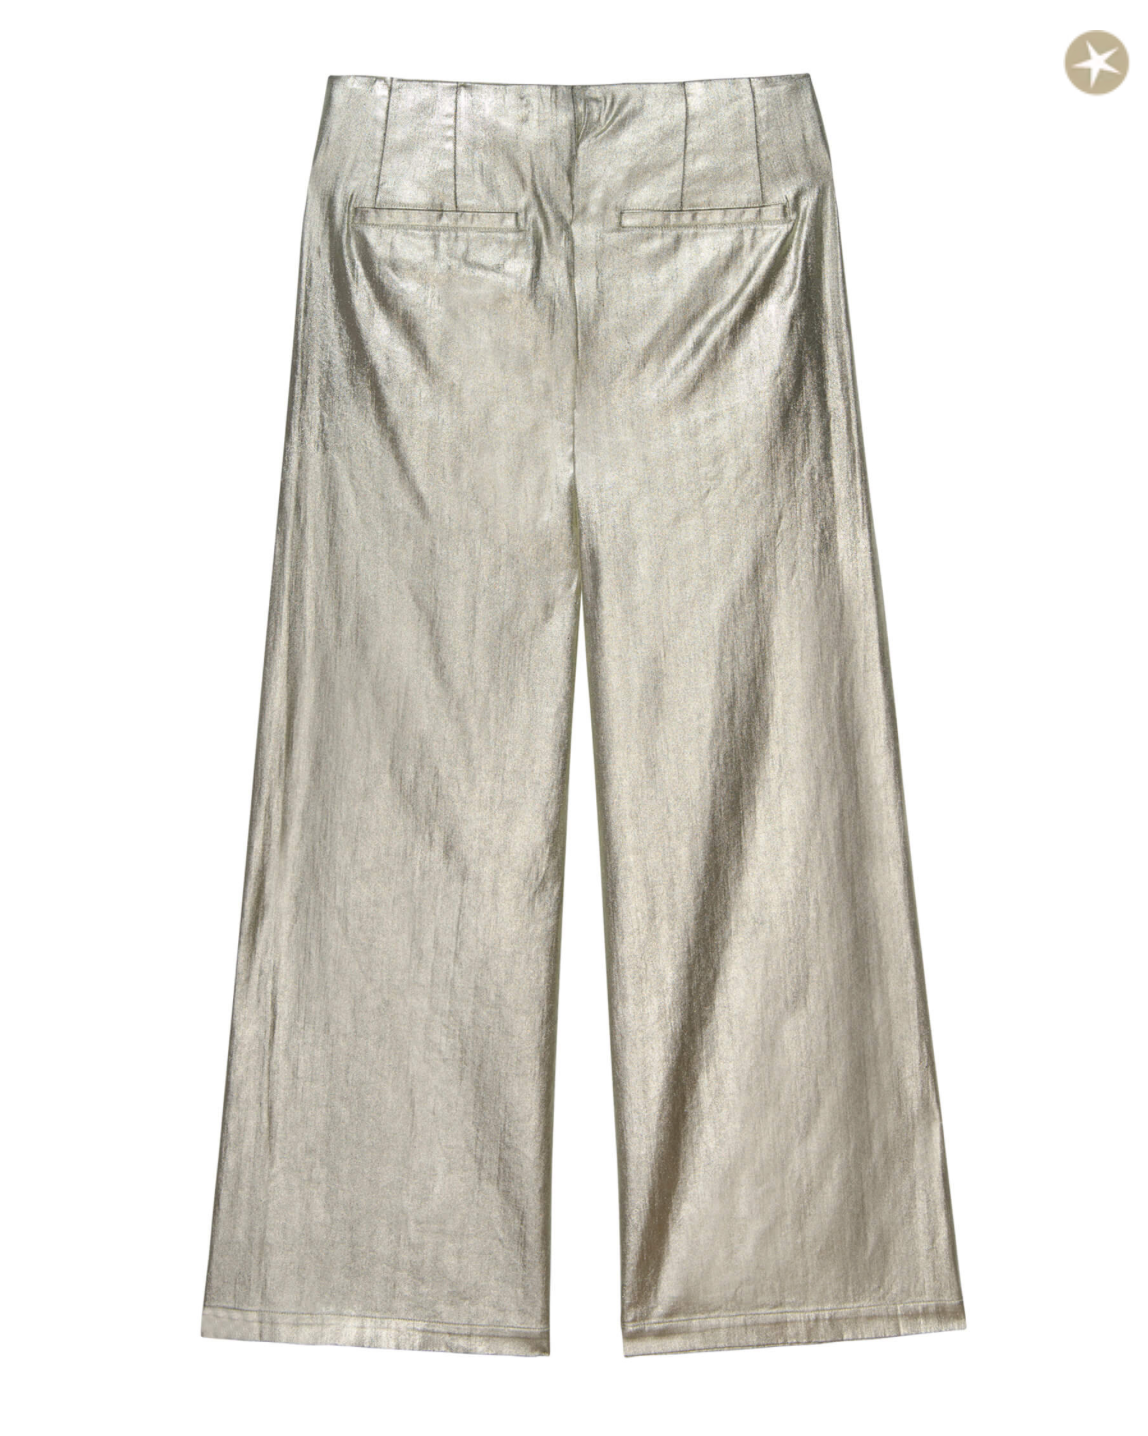 The Sculpted Trouser. Starlight